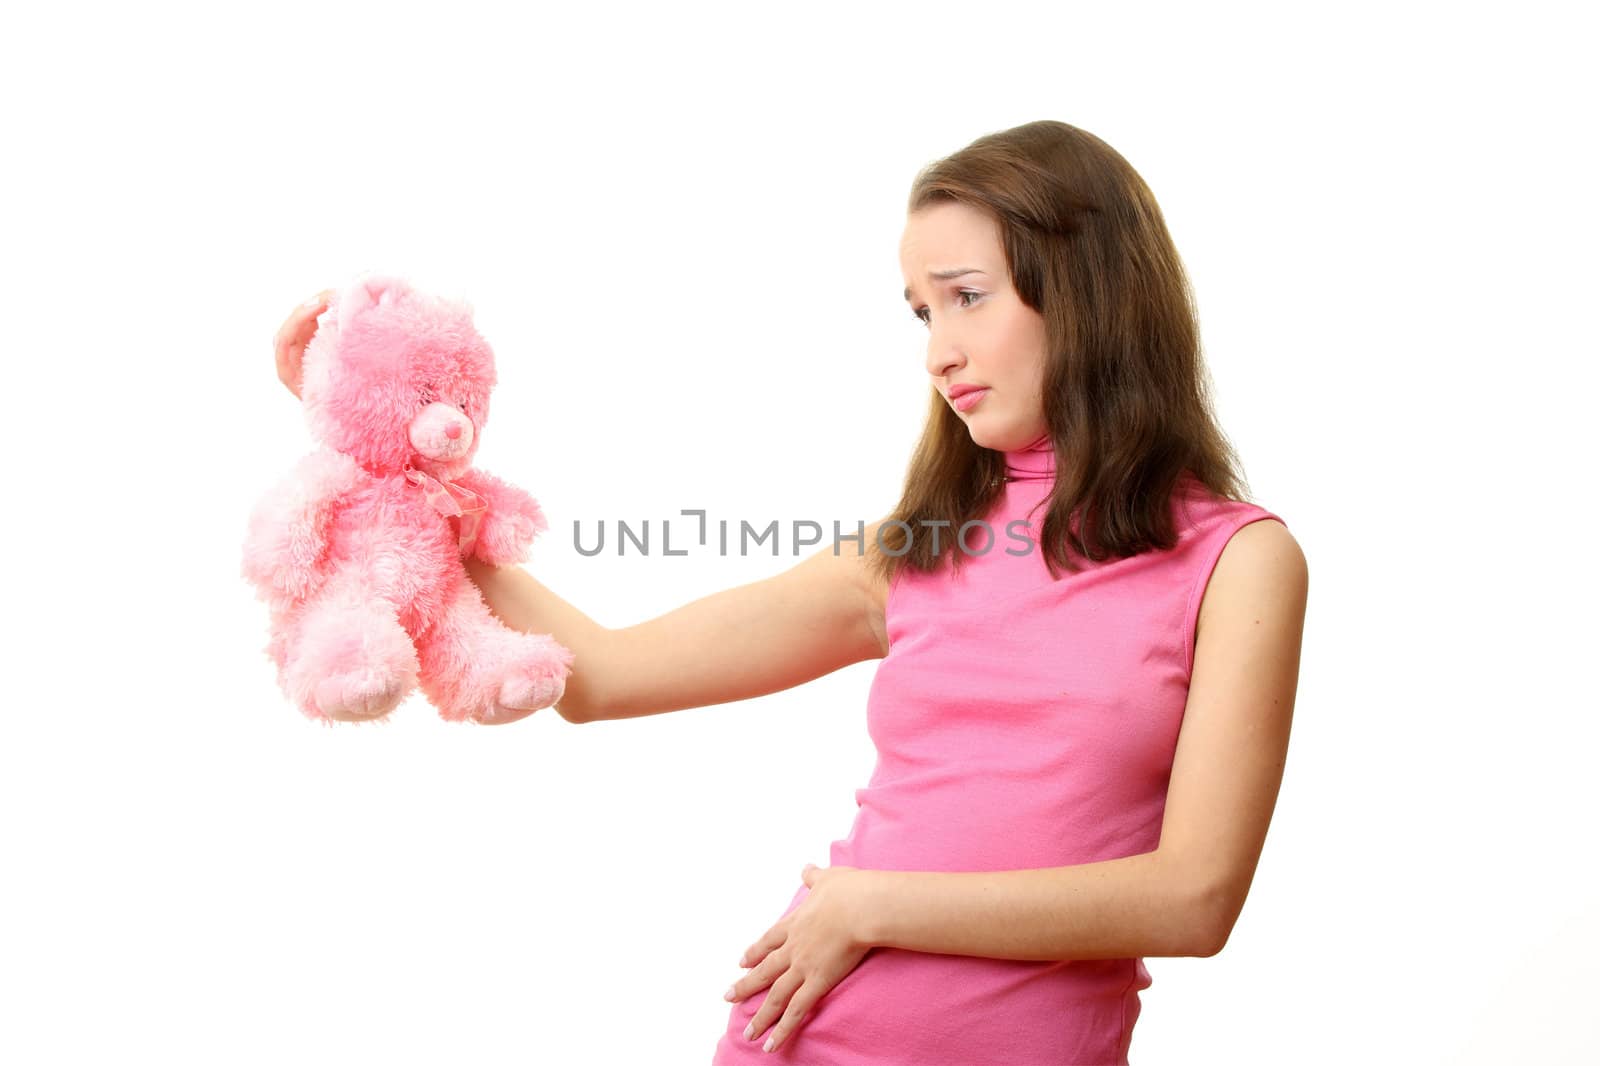 The girl with a pink teddy bear